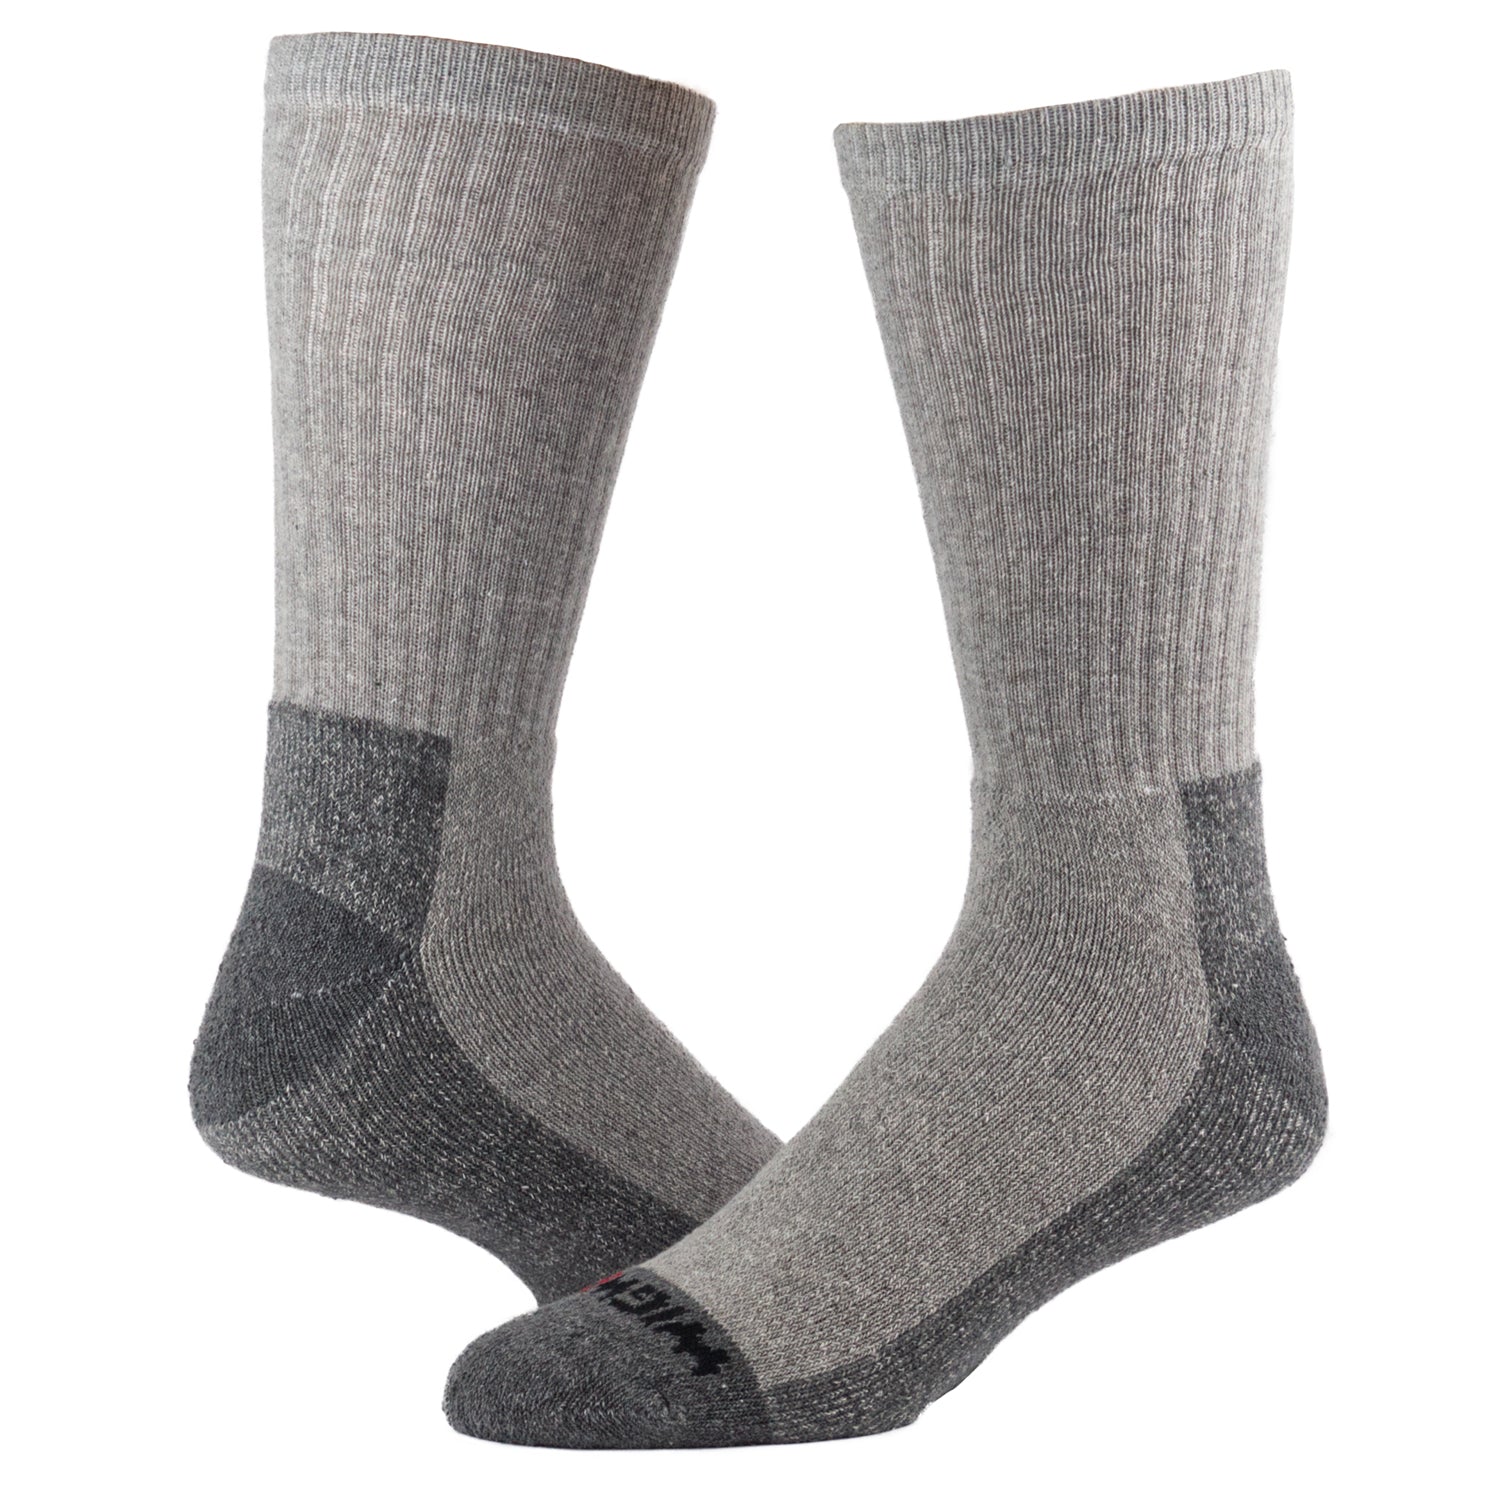 At Work Crew 3-Pack Cotton Socks - Grey full product perspective - made in The USA Wigwam Socks